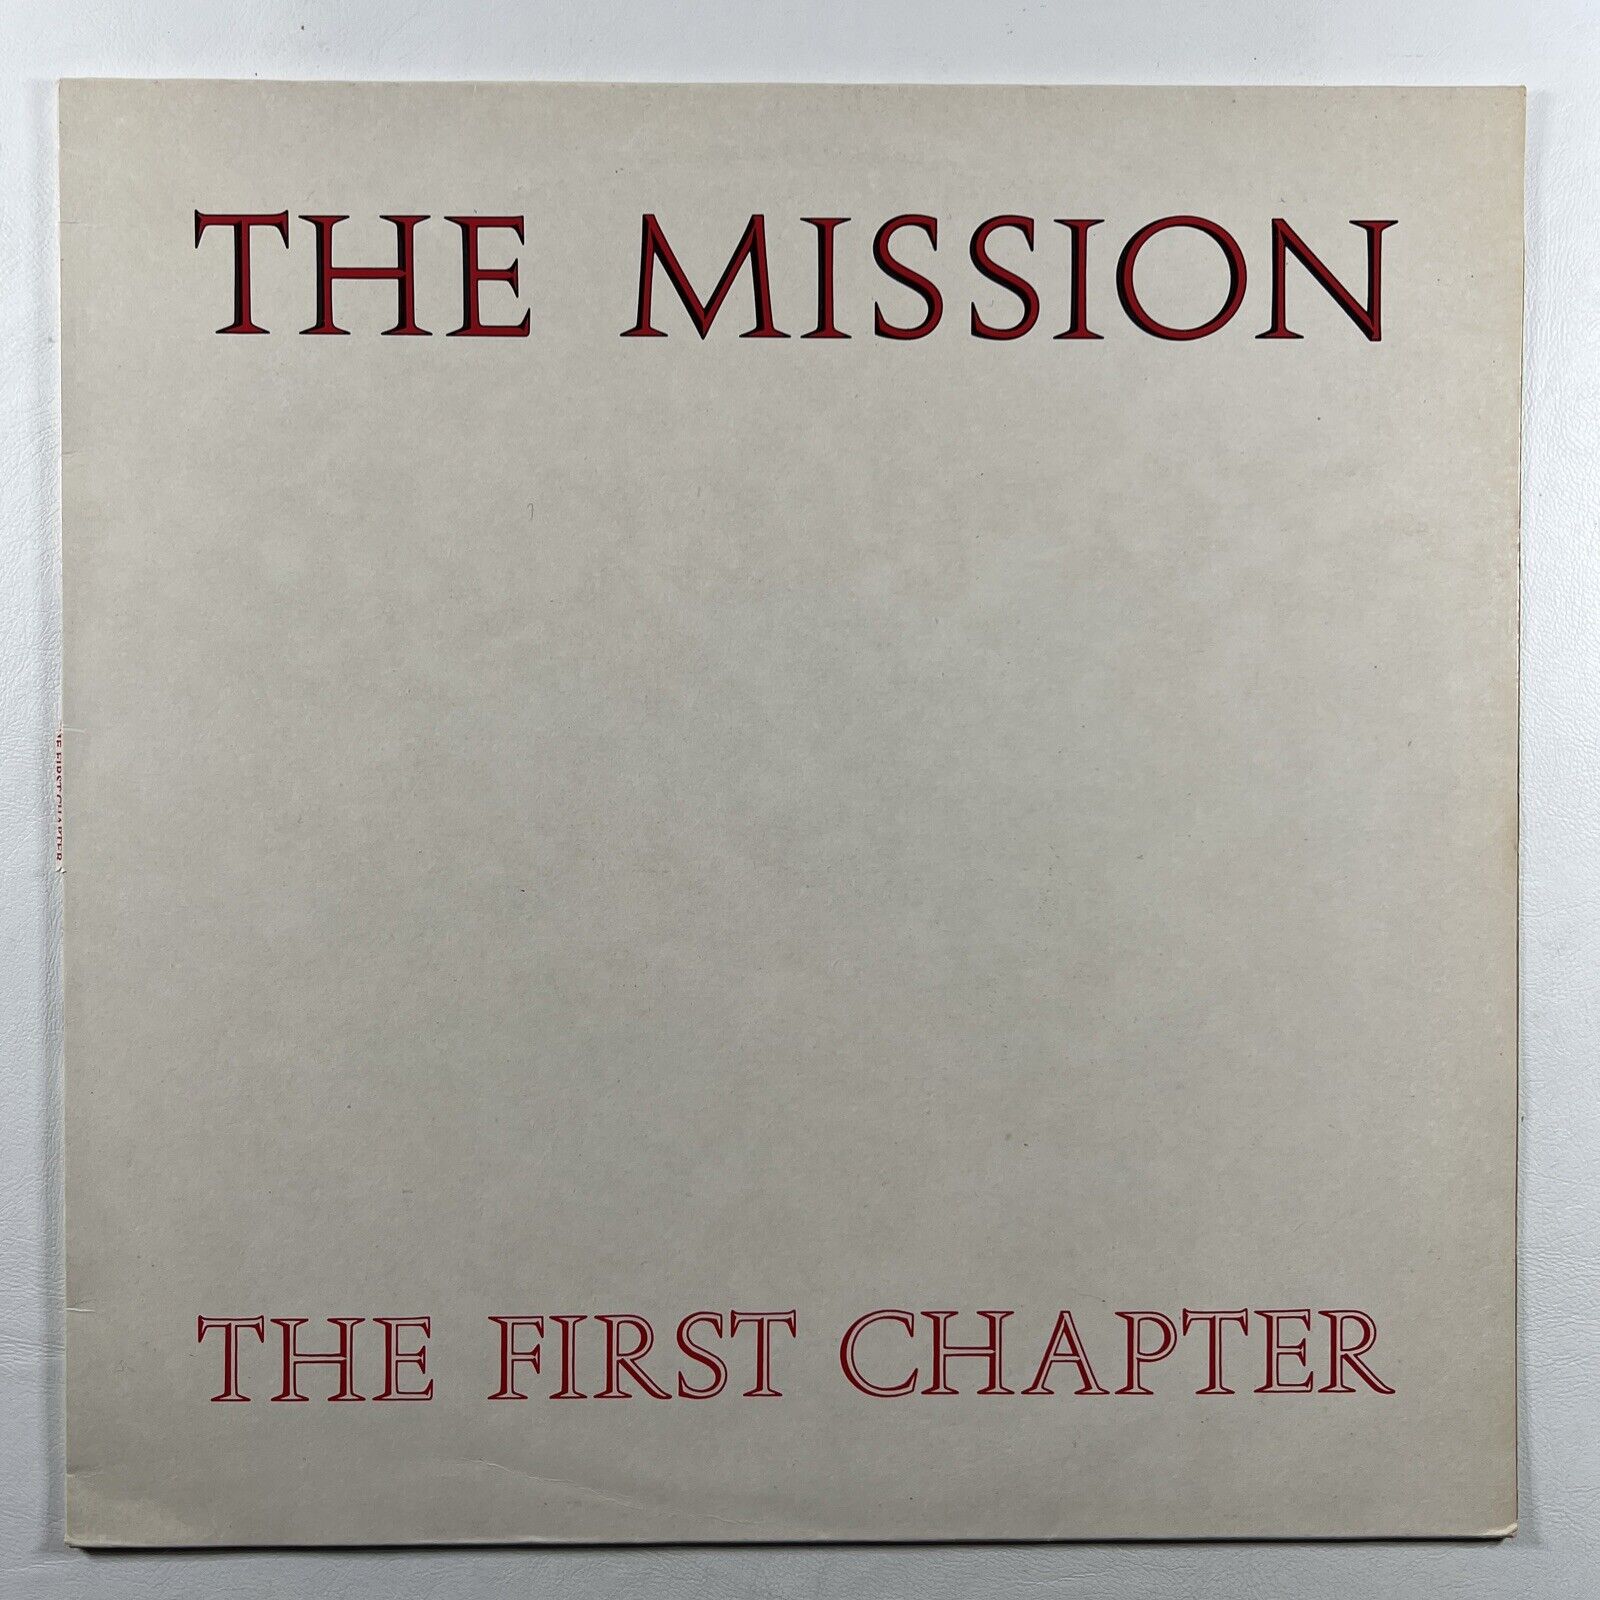 THE MISSION “The First Chapter” LP/Mercury MISH 1 (EX) UK 1986